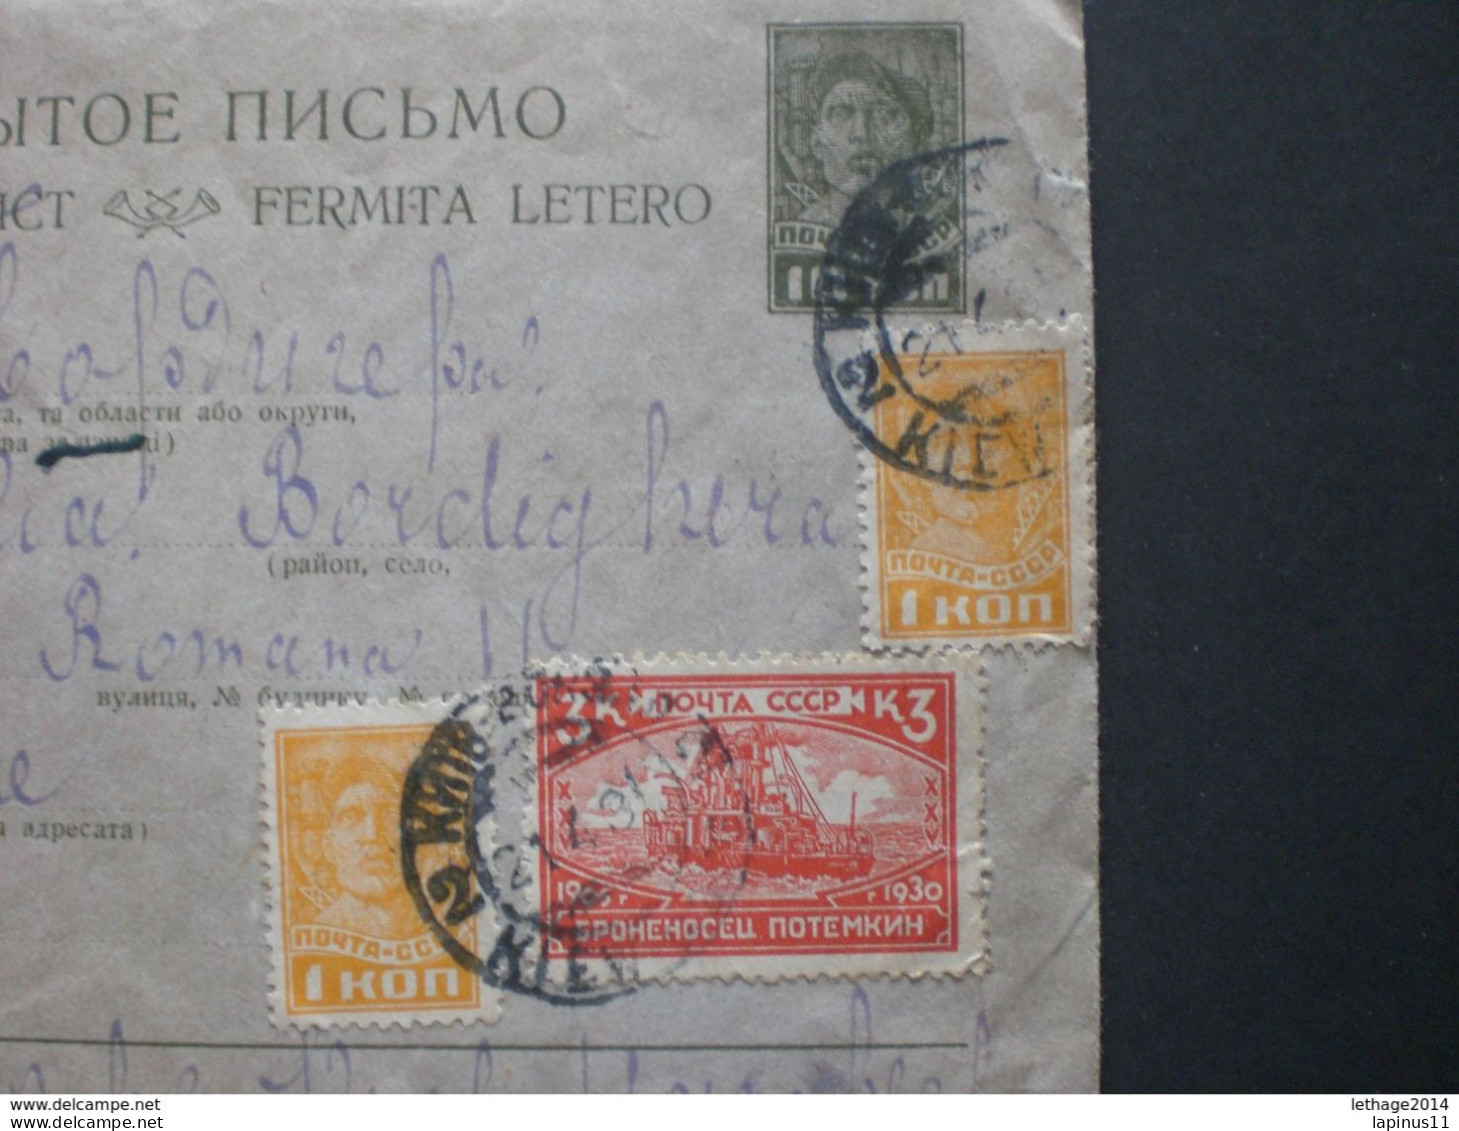 RUSSIA RUSSIE РОССИЯ STAMPS COVER 1931 REGISTER MAIL RUSSLAND TO ITALY RRR RIF. TAGG (144) - Briefe U. Dokumente